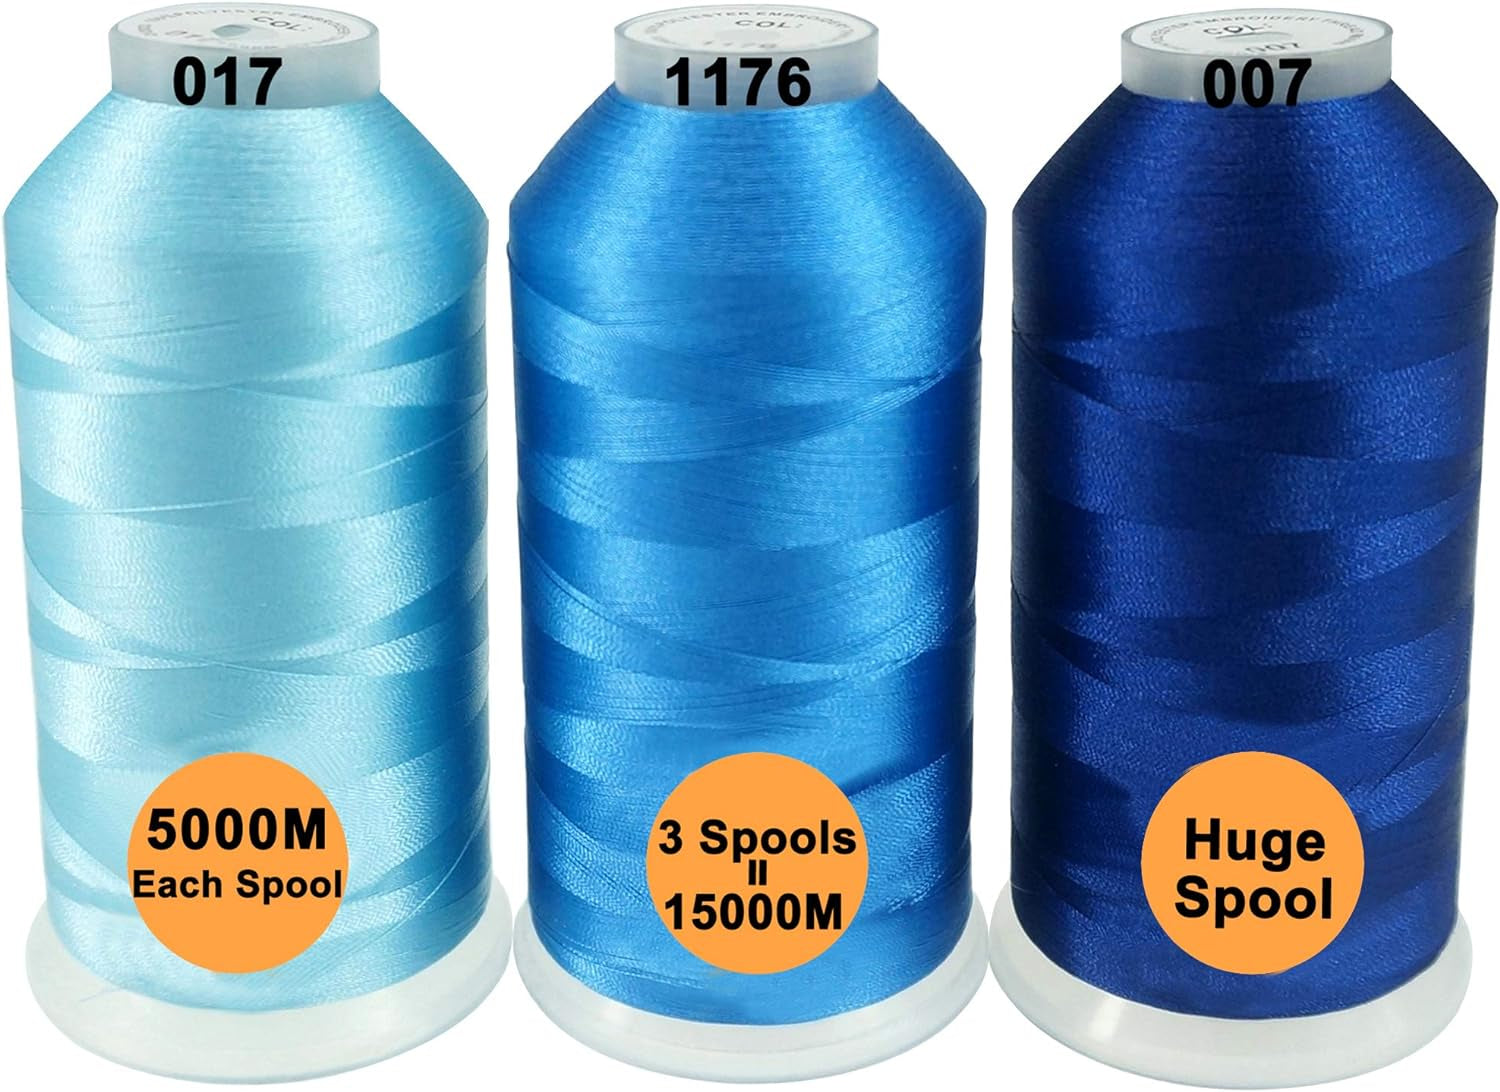 Polyester Embroidery Machine Thread Assorted Color Packs - 40 Options - 5000M Spool - for All Embroidery Machines